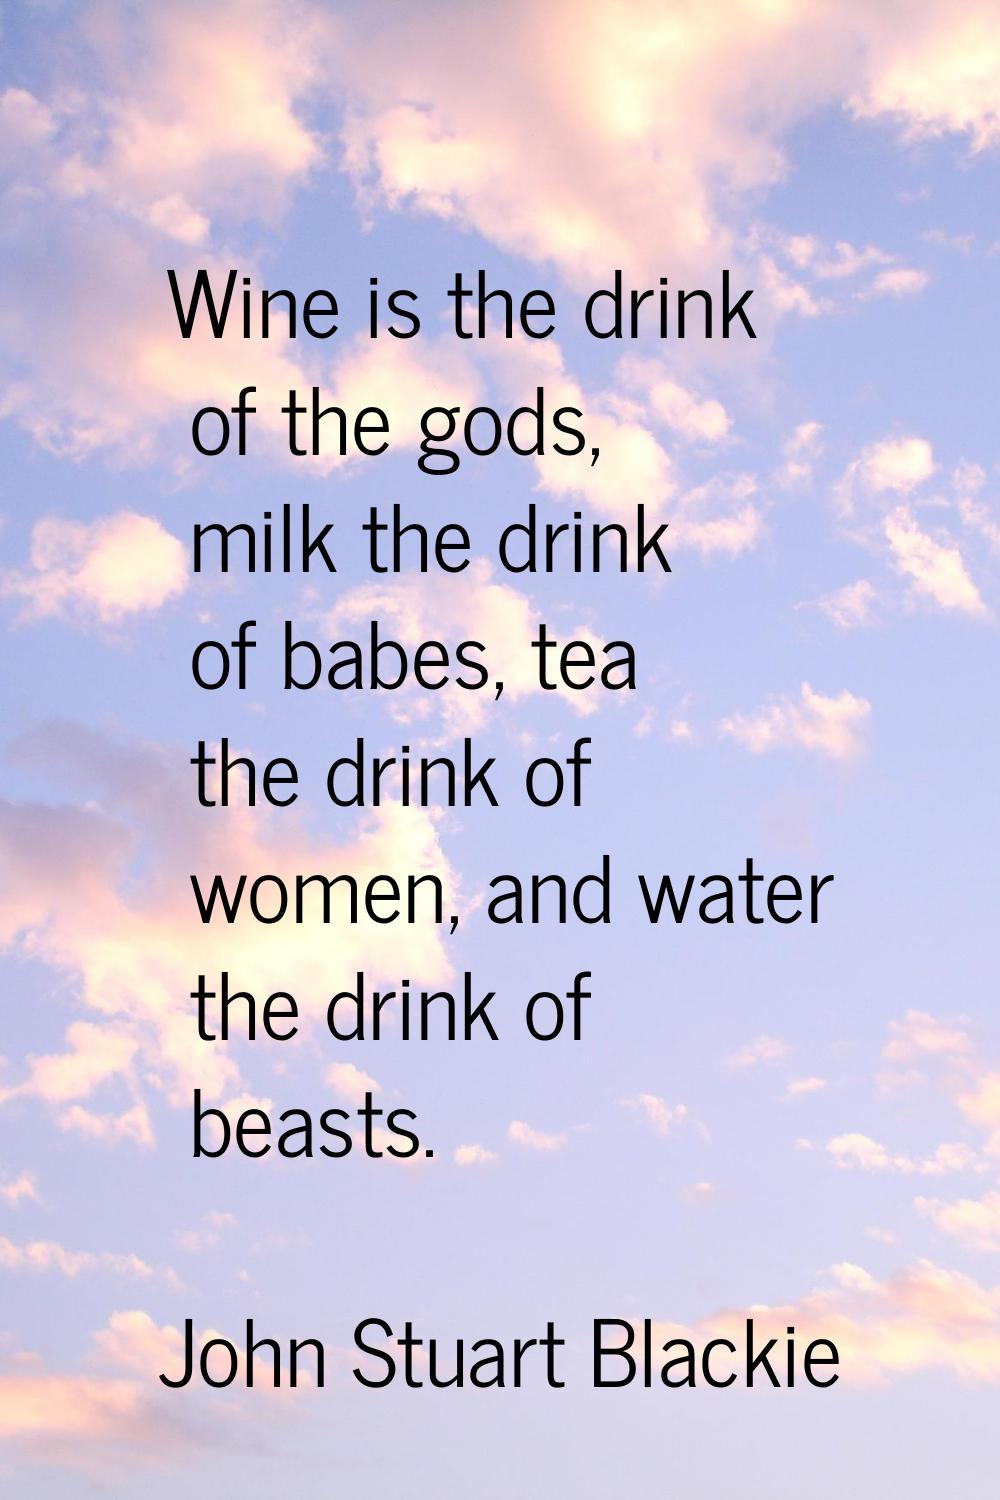 Wine is the drink of the gods, milk the drink of babes, tea the drink of women, and water the drink